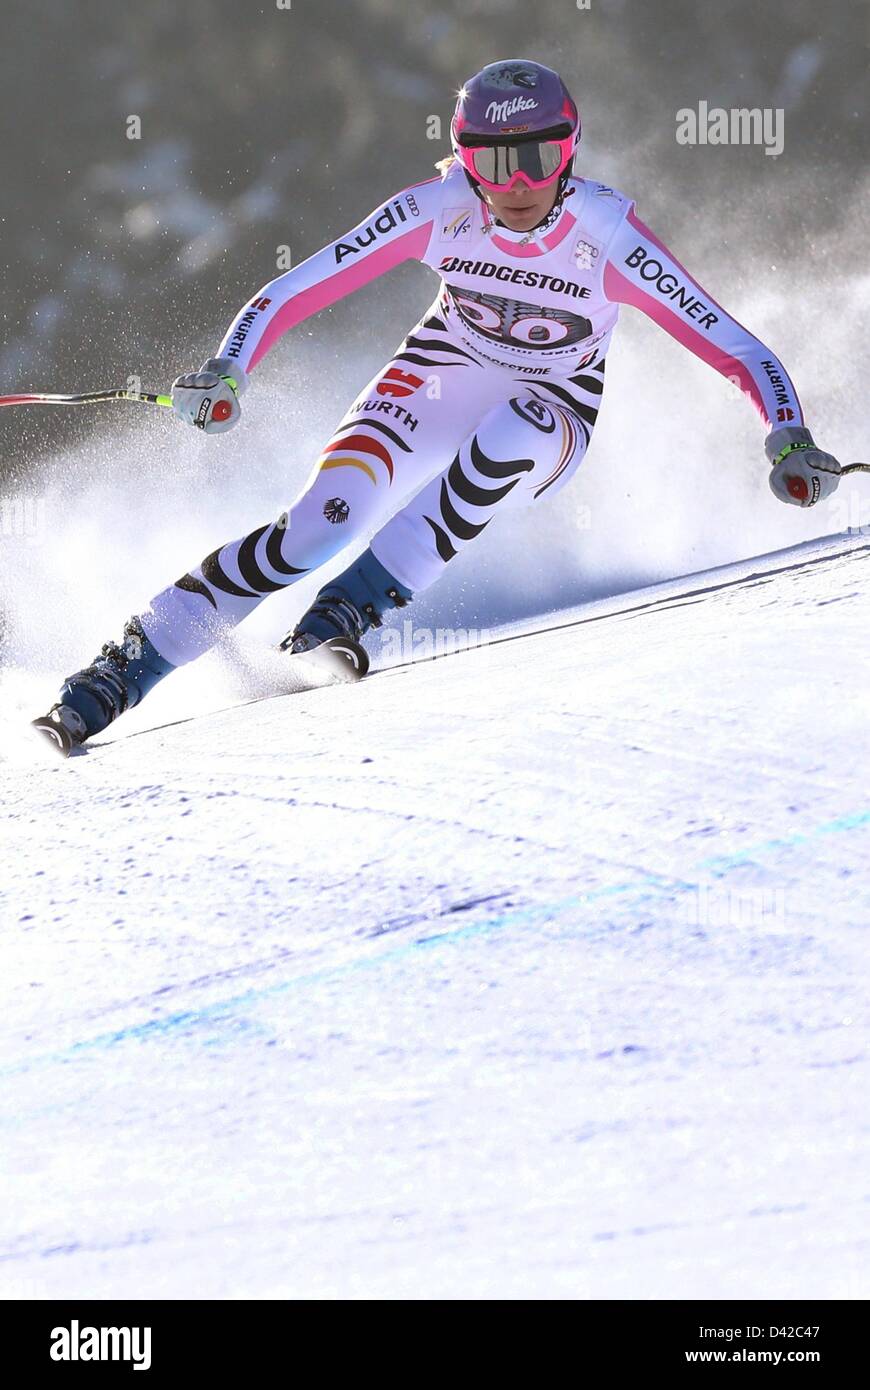 Maria Höfl-Riesch (Germany) in action at the women's downhill race of the Alpine Skiing World Cup in Garmisch-Partenkirchen, Germany, 02 March 2013. Photo: Karl-Josef Hildenbrand Stock Photo